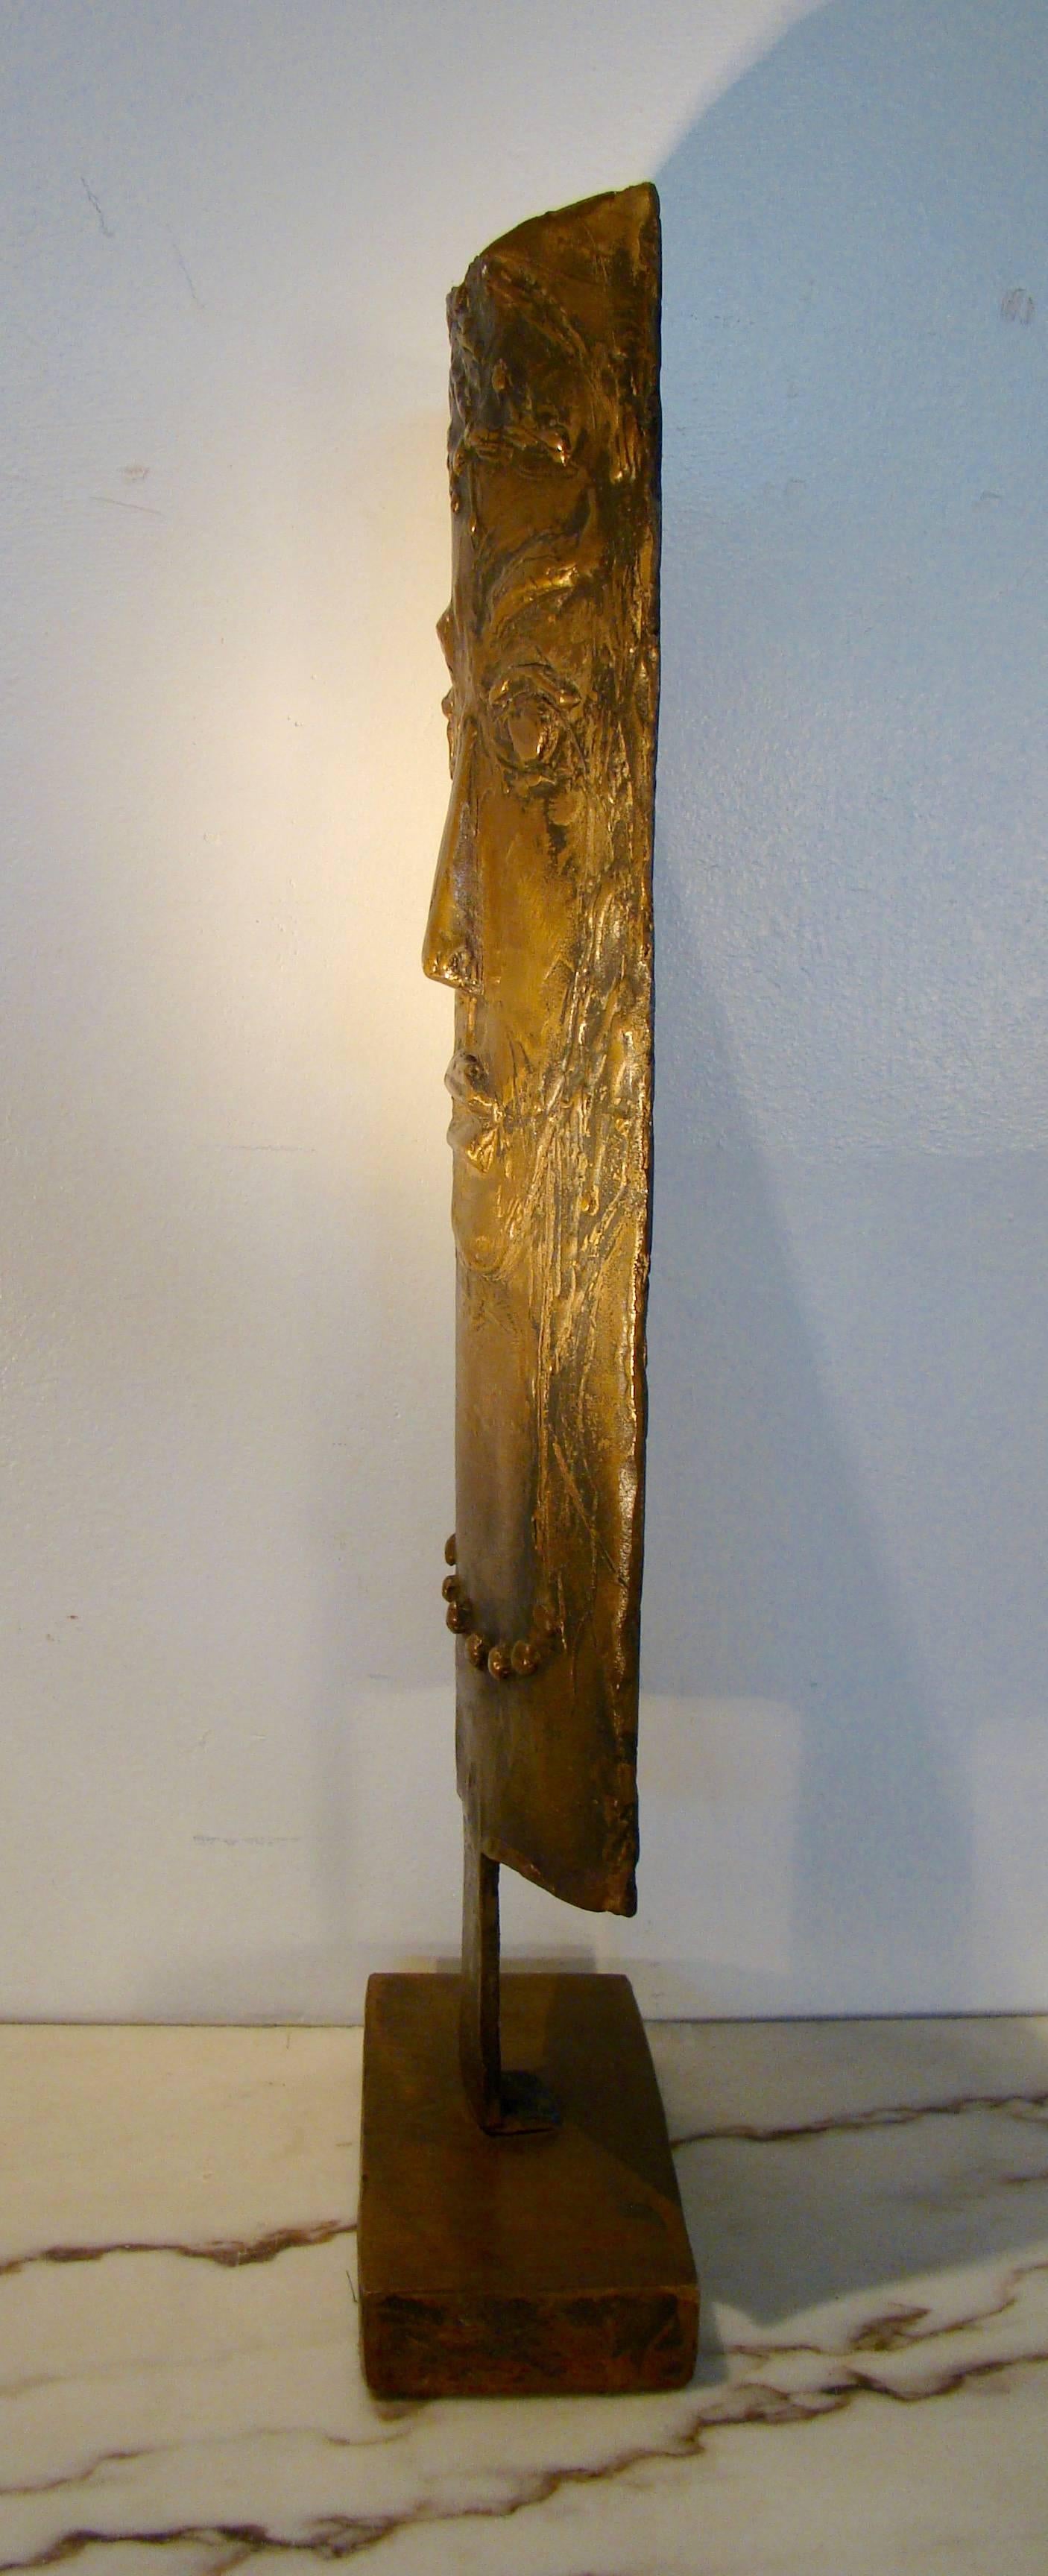 Flat plate bronze torch-cut, forged and figured bust on a bronze stand.
Signed: E. Katz, circa 1965. Measures: 